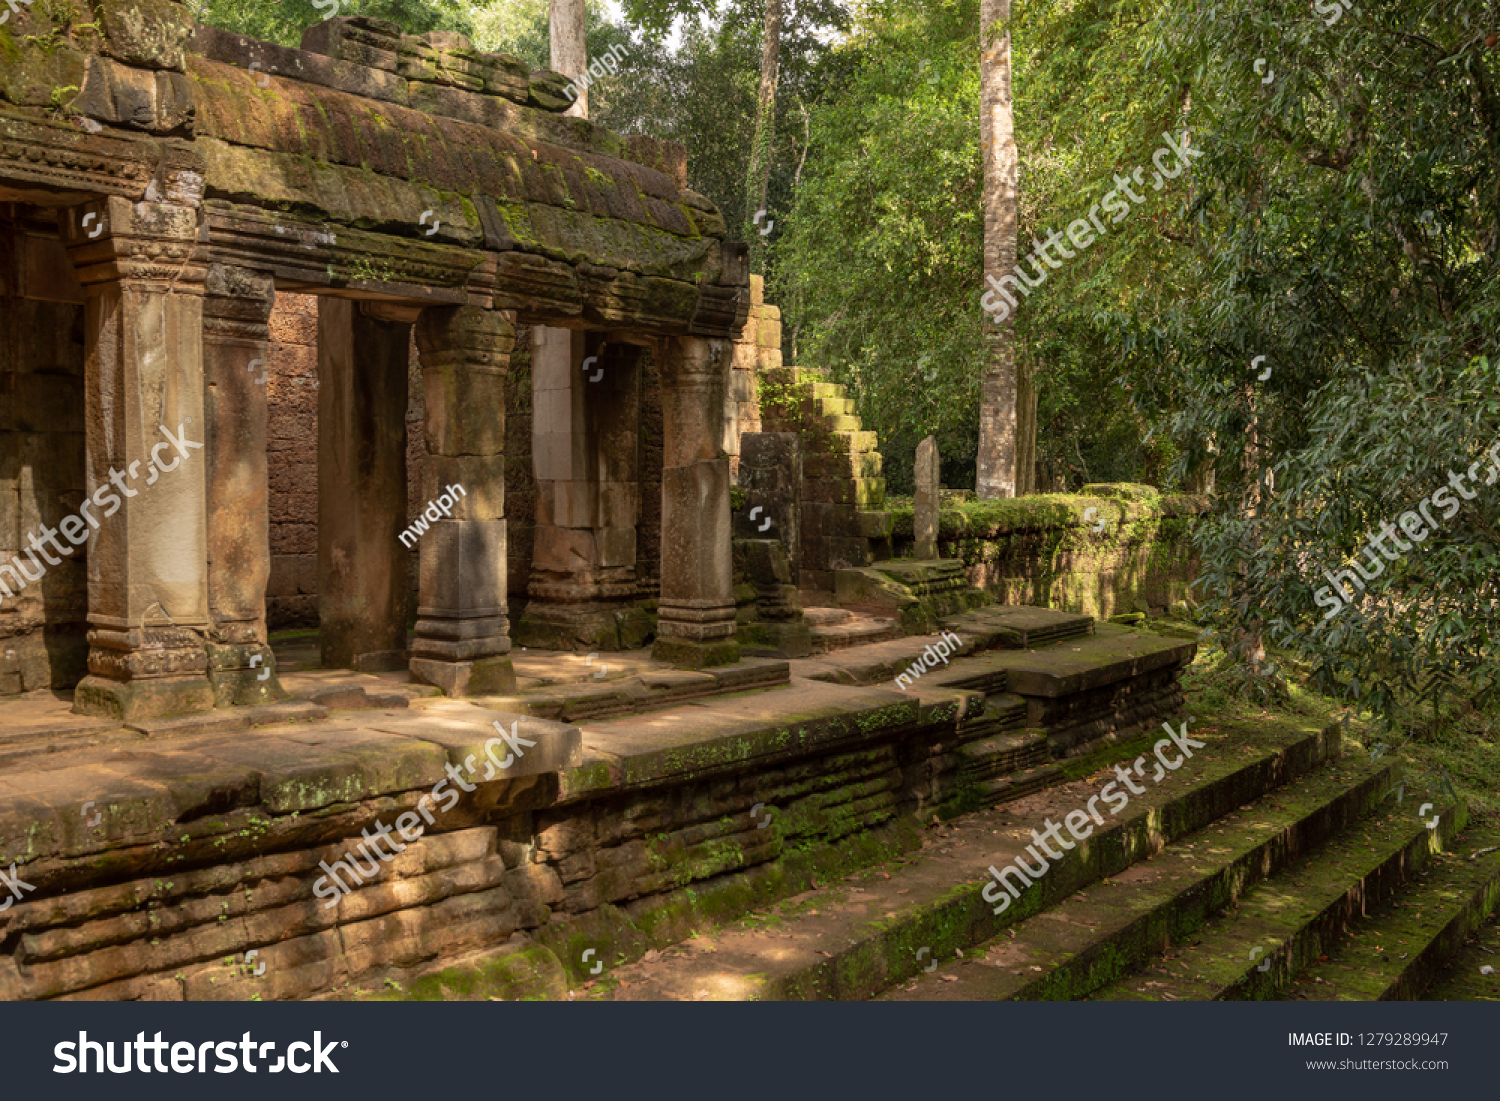 Colonnade Steps Ruined Jungle Temple Stock Photo Edit Now